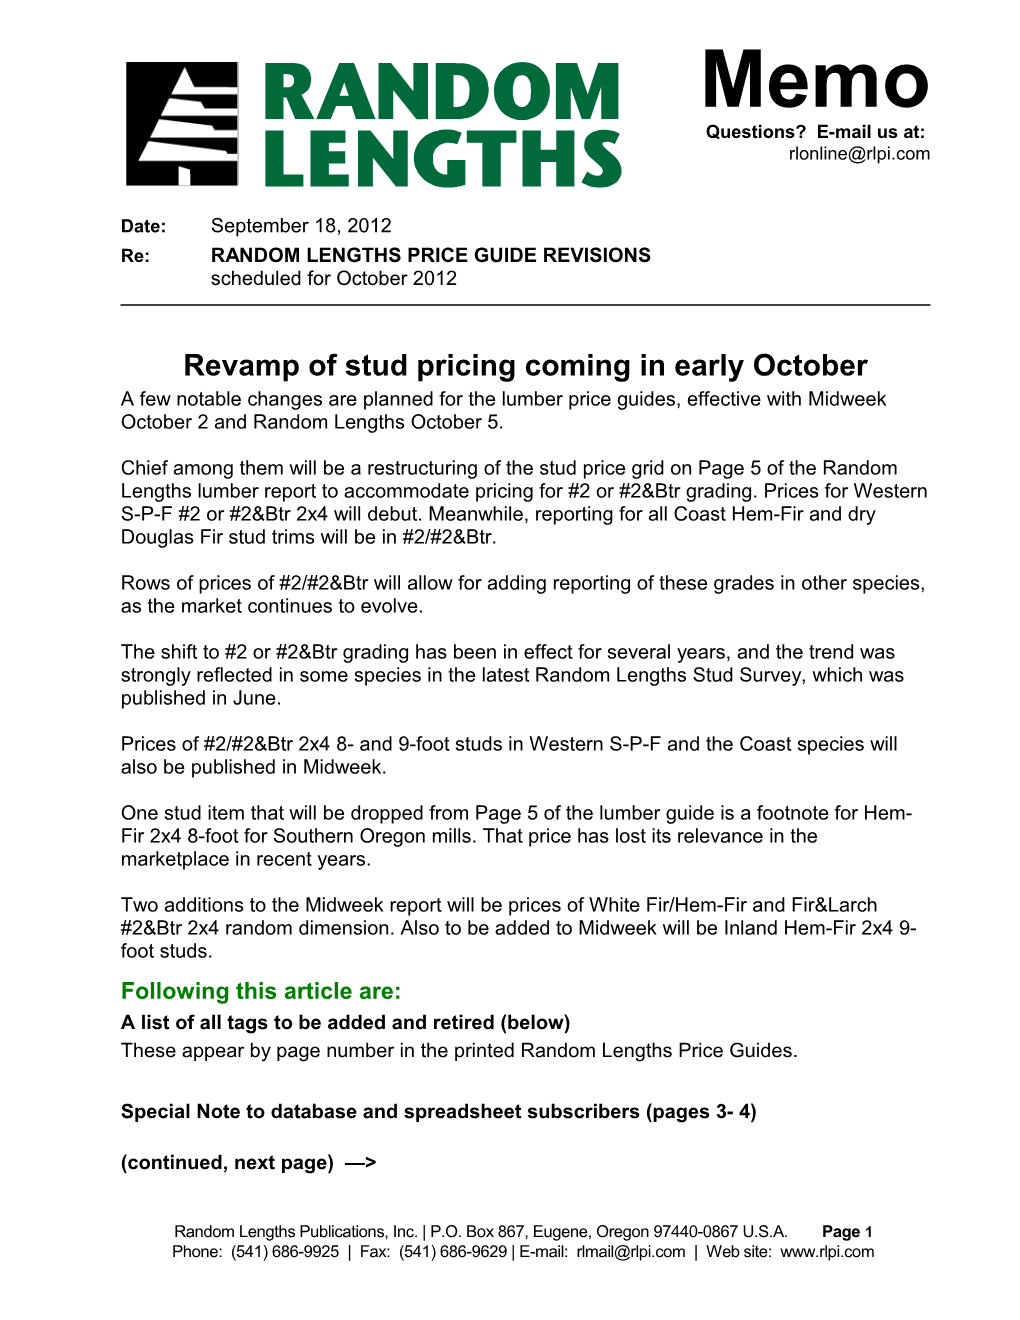 Revamp of Stud Pricing Coming in Early October